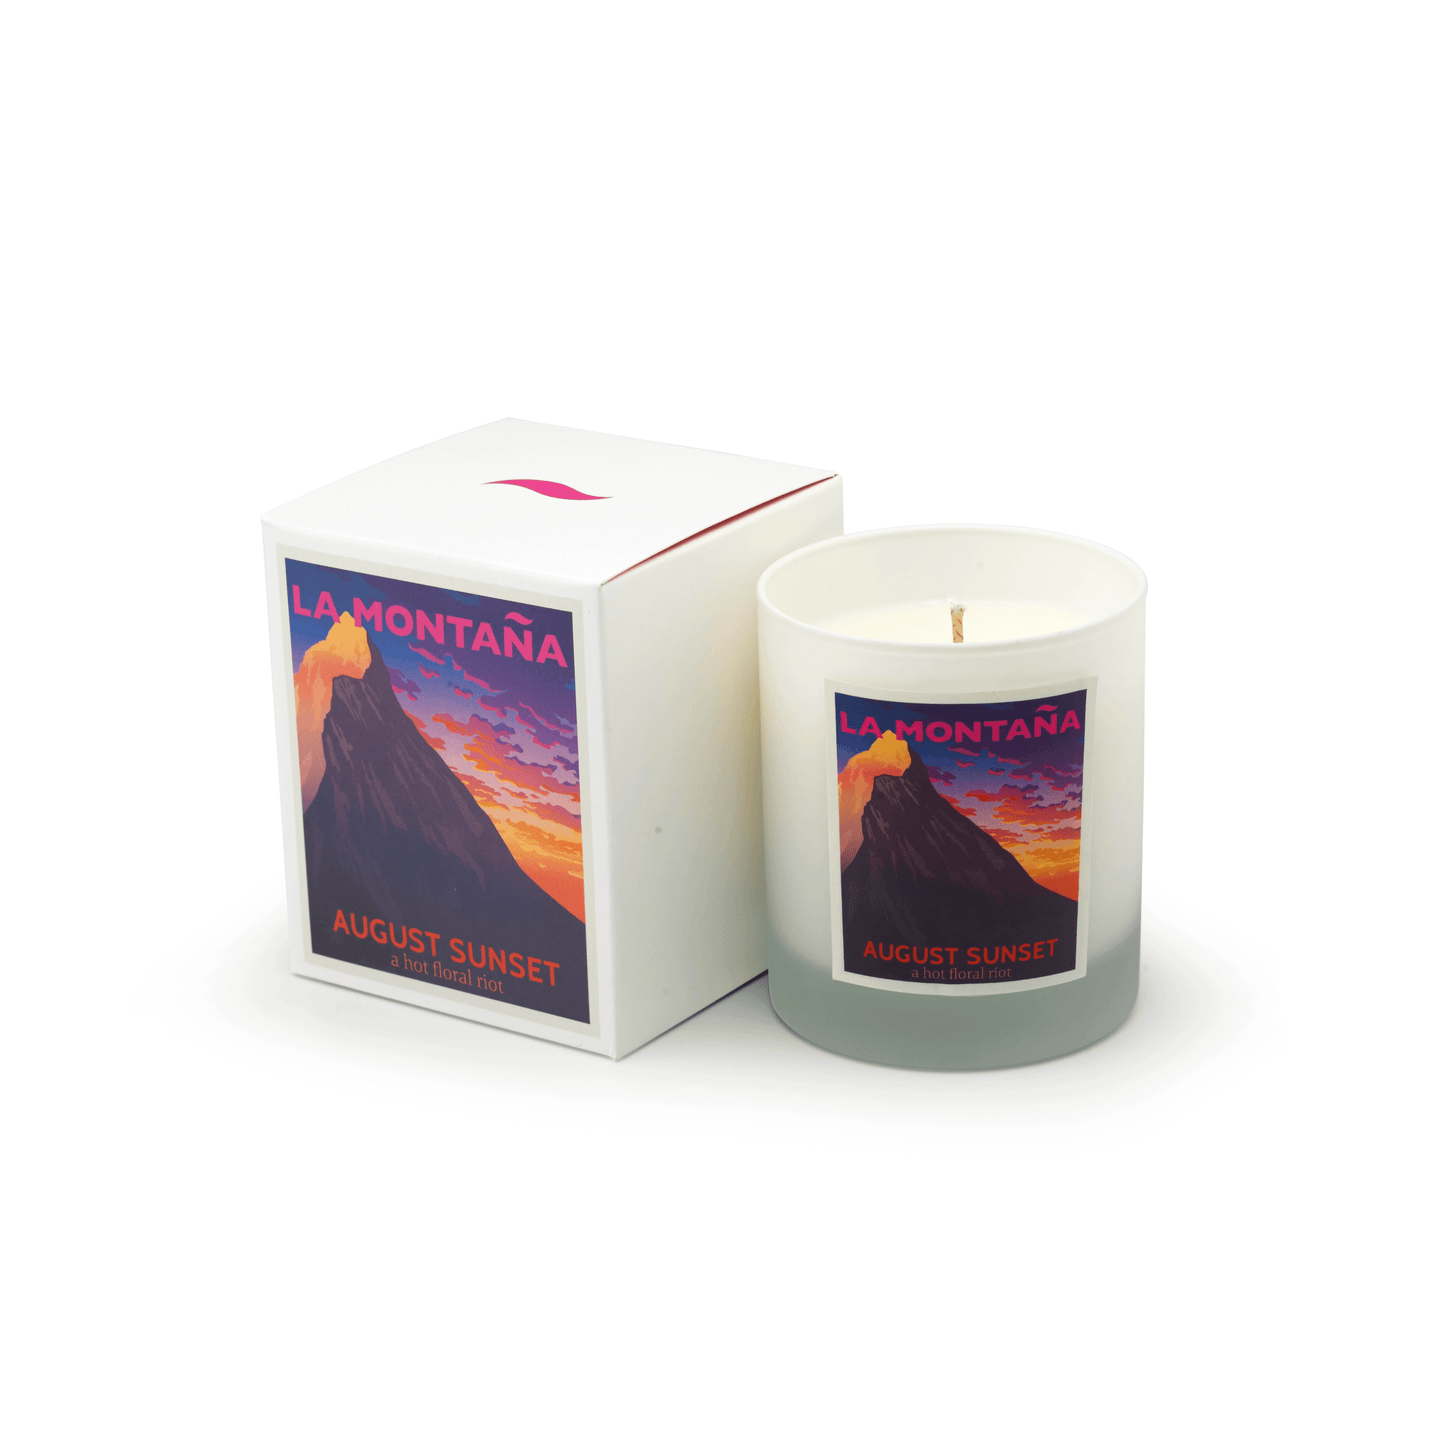 La Montaña August Sunset Scented Candle